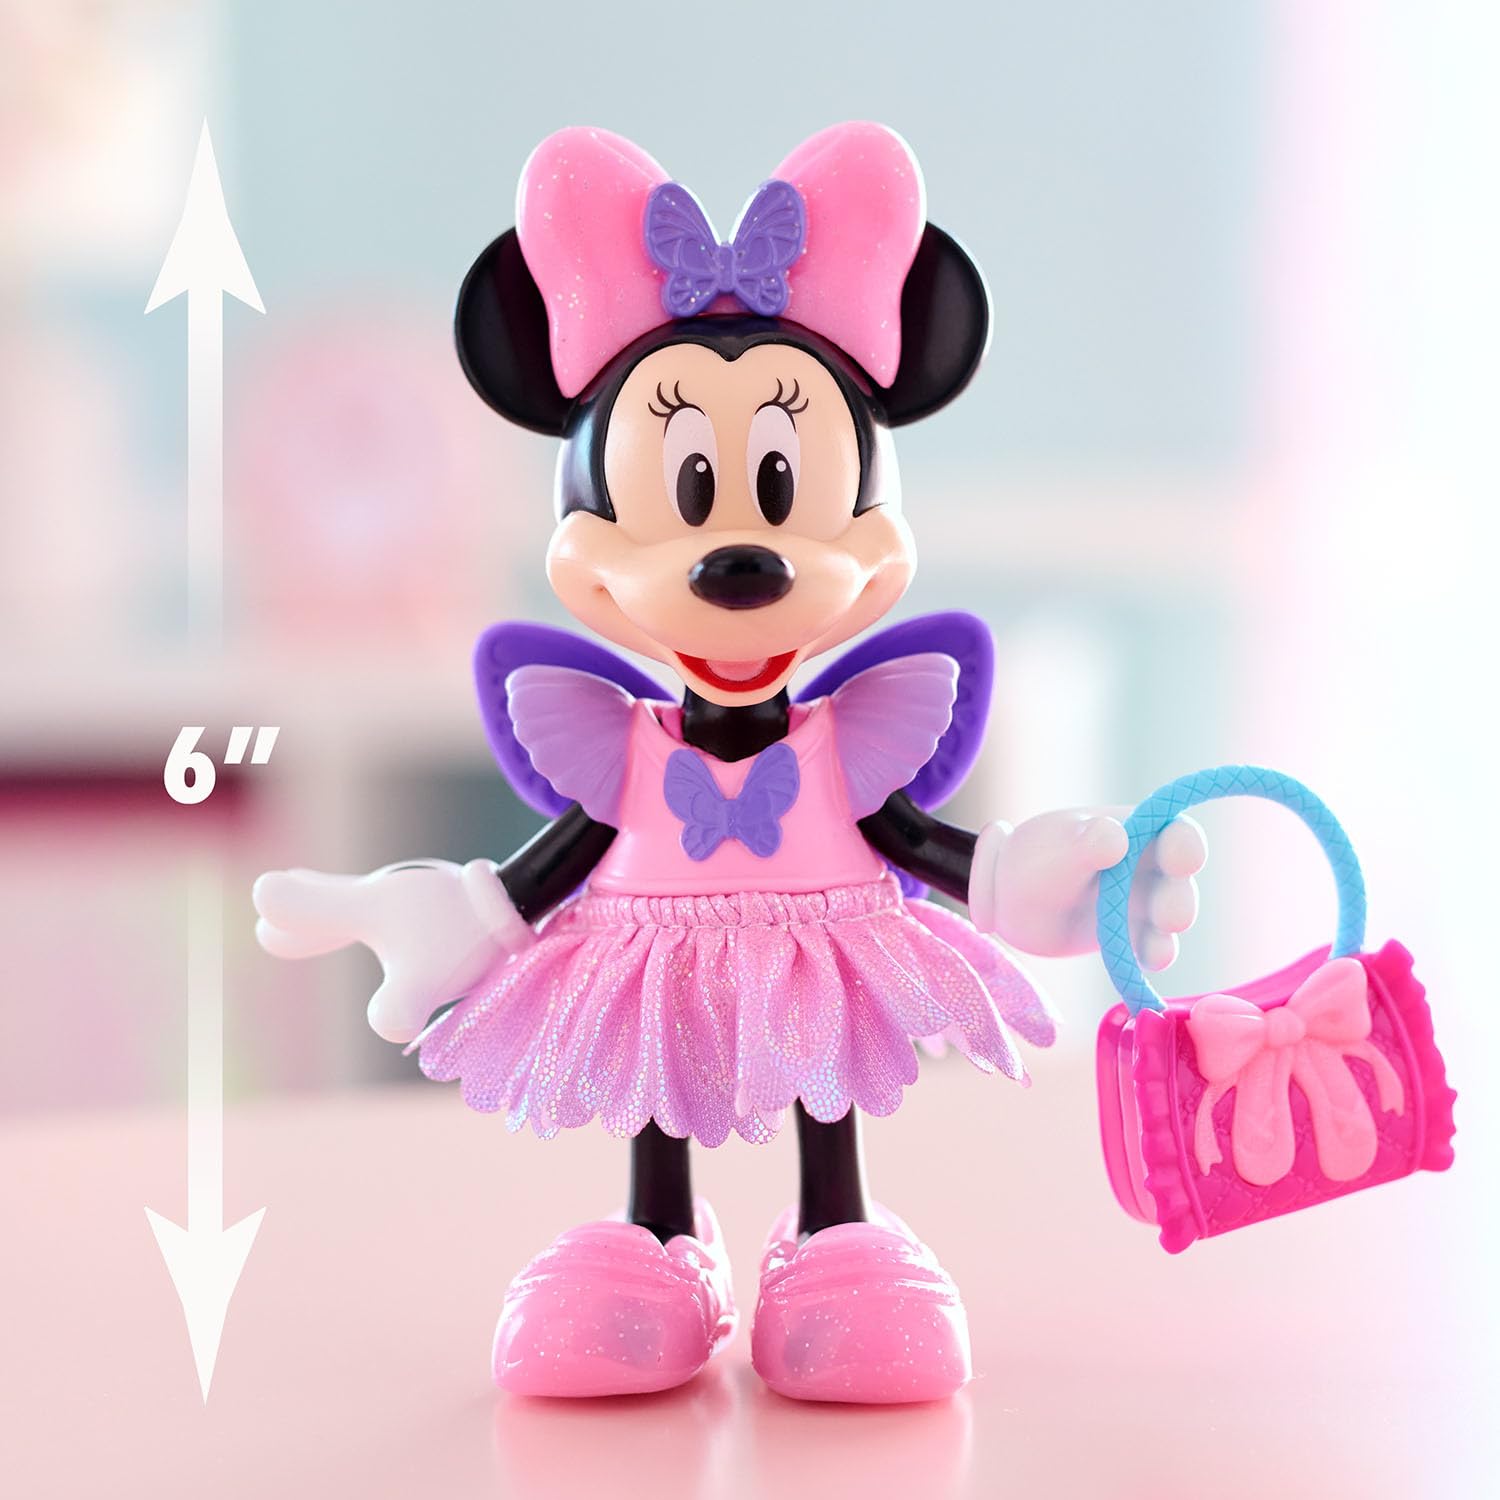 Disney Junior Minnie Mouse Fabulous Fashion Ballerina Doll, 13-piece Doll and Accessories Set, Officially Licensed Kids Toys for Ages 3 Up, Gifts and Presents by Just Play